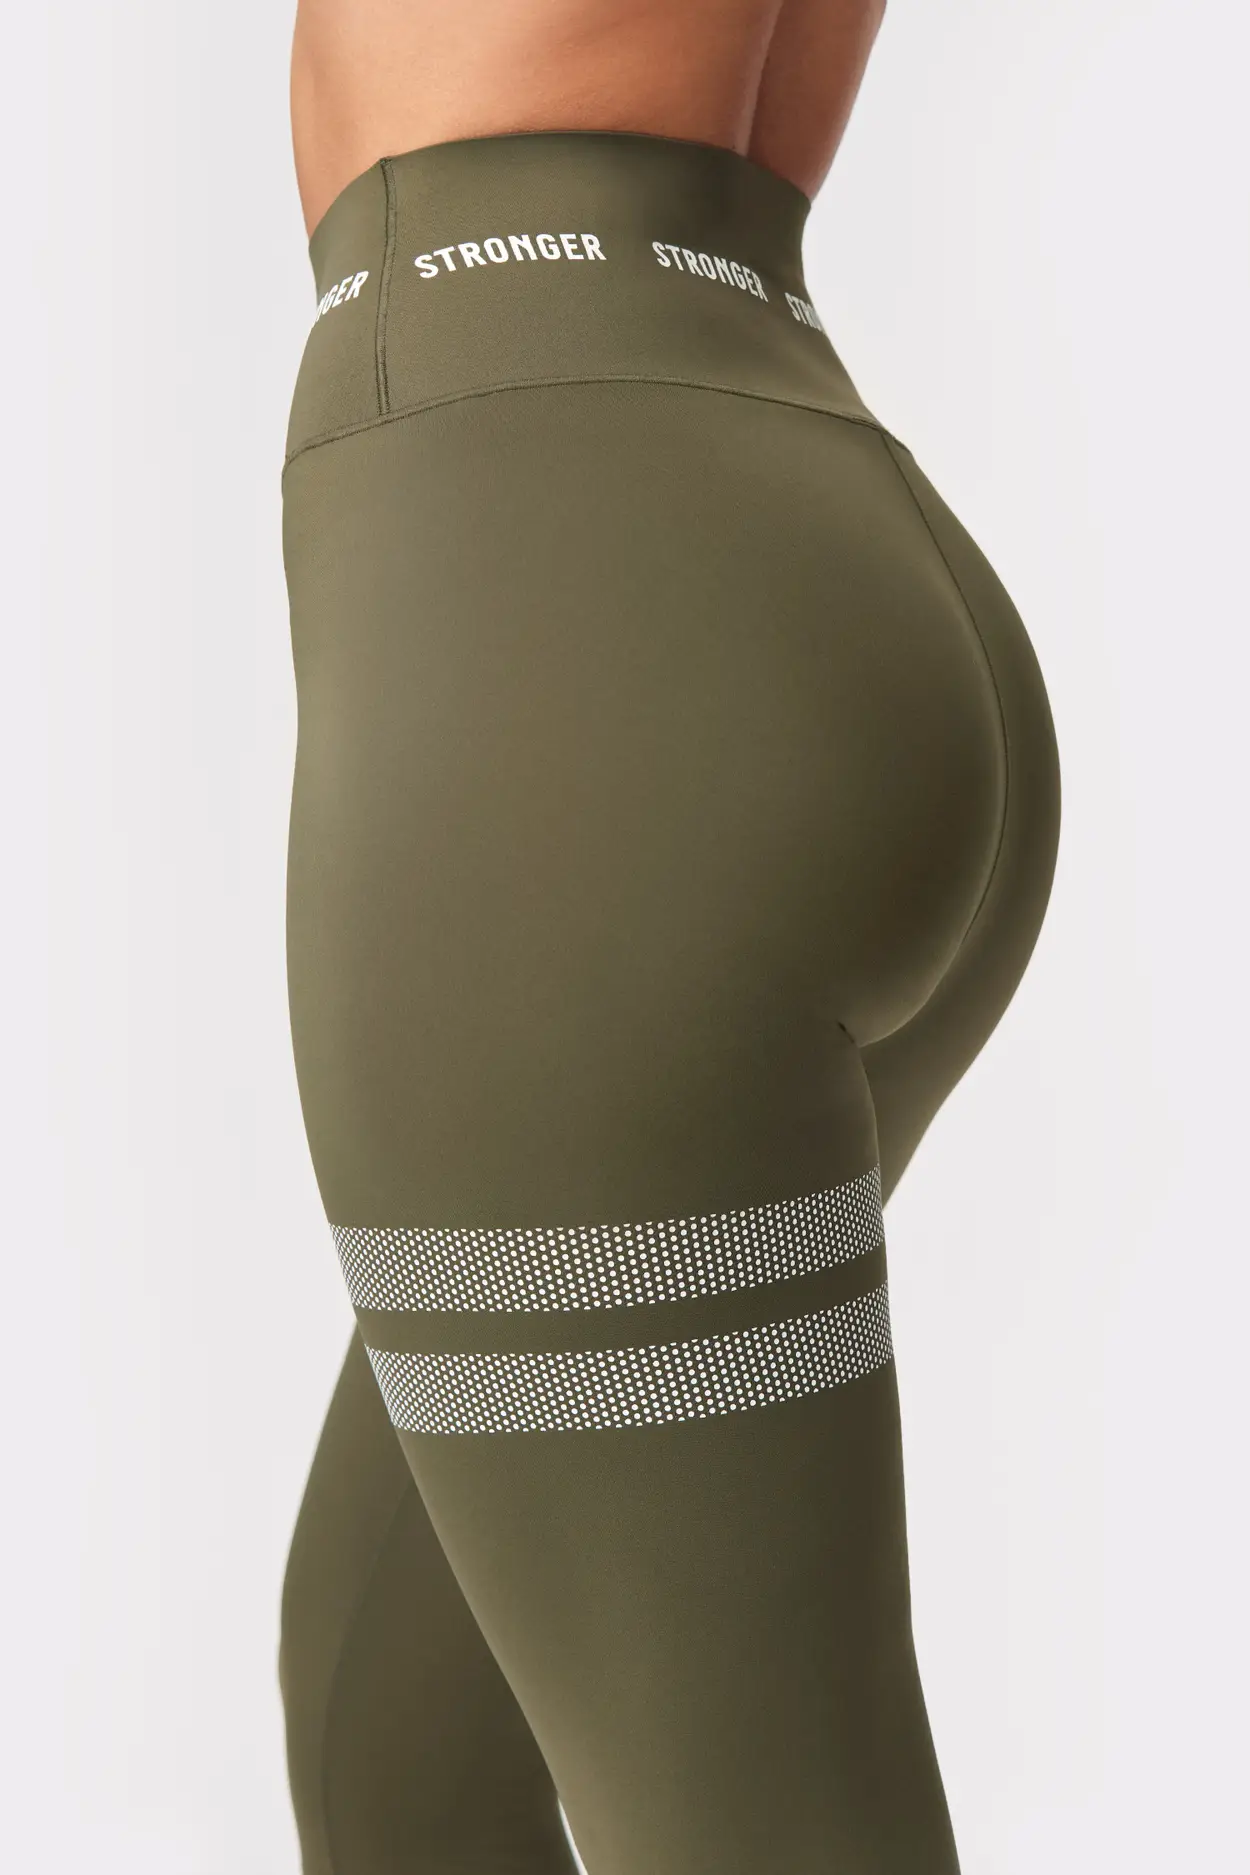 Olive Green Scrunch Leggings – Morgainz Collection